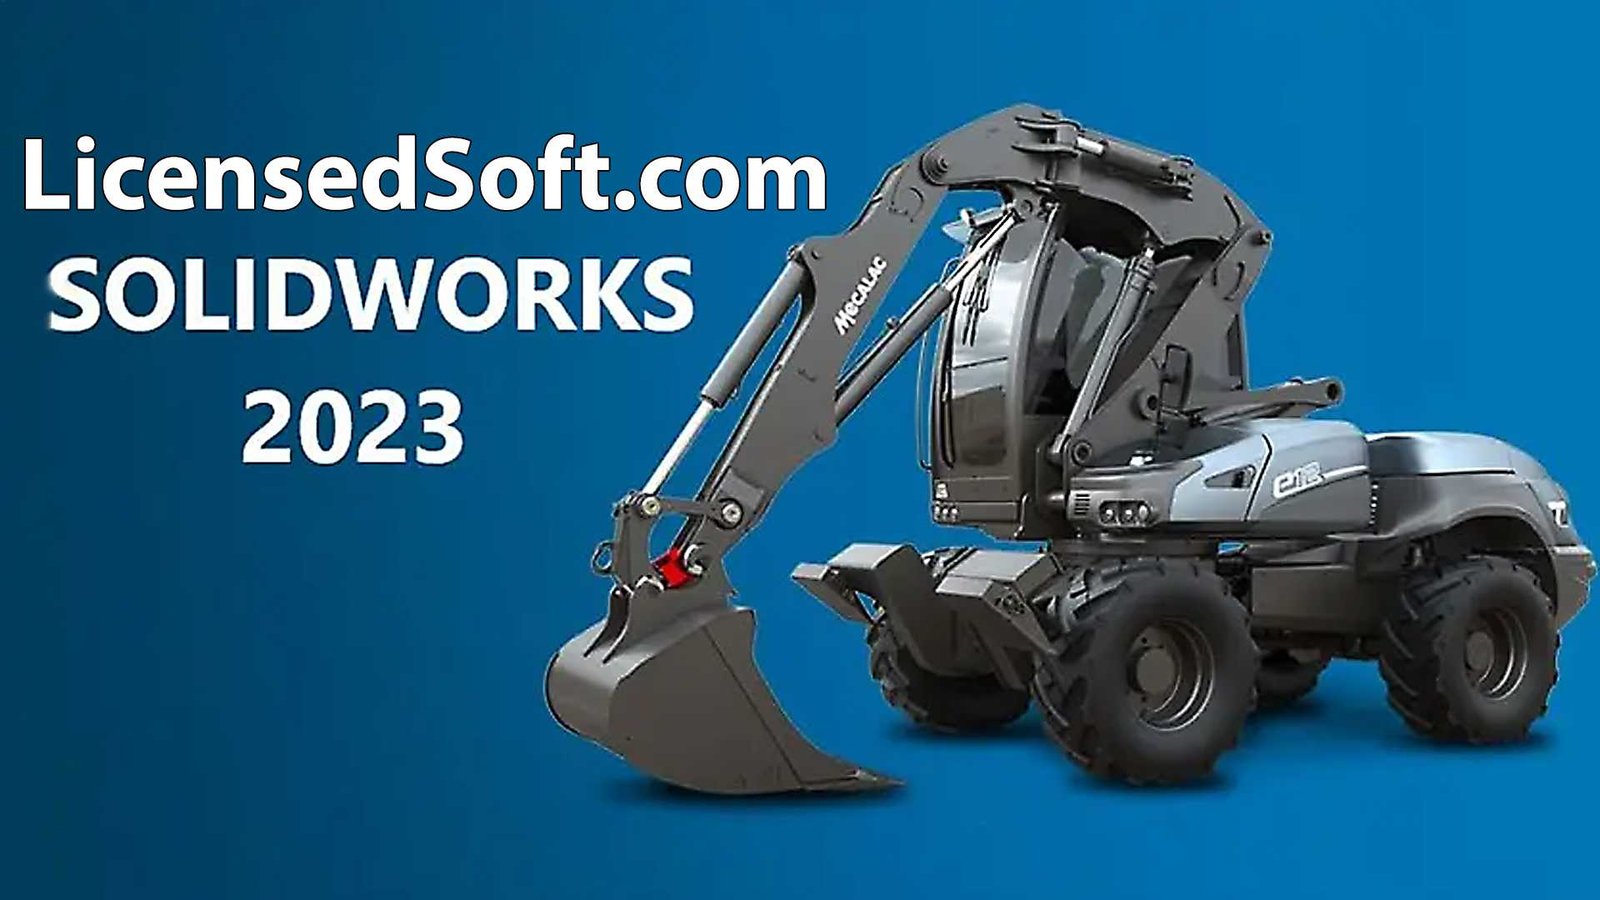 Solidworks SP3 2023 Full Premium Cover By LicensedSoft